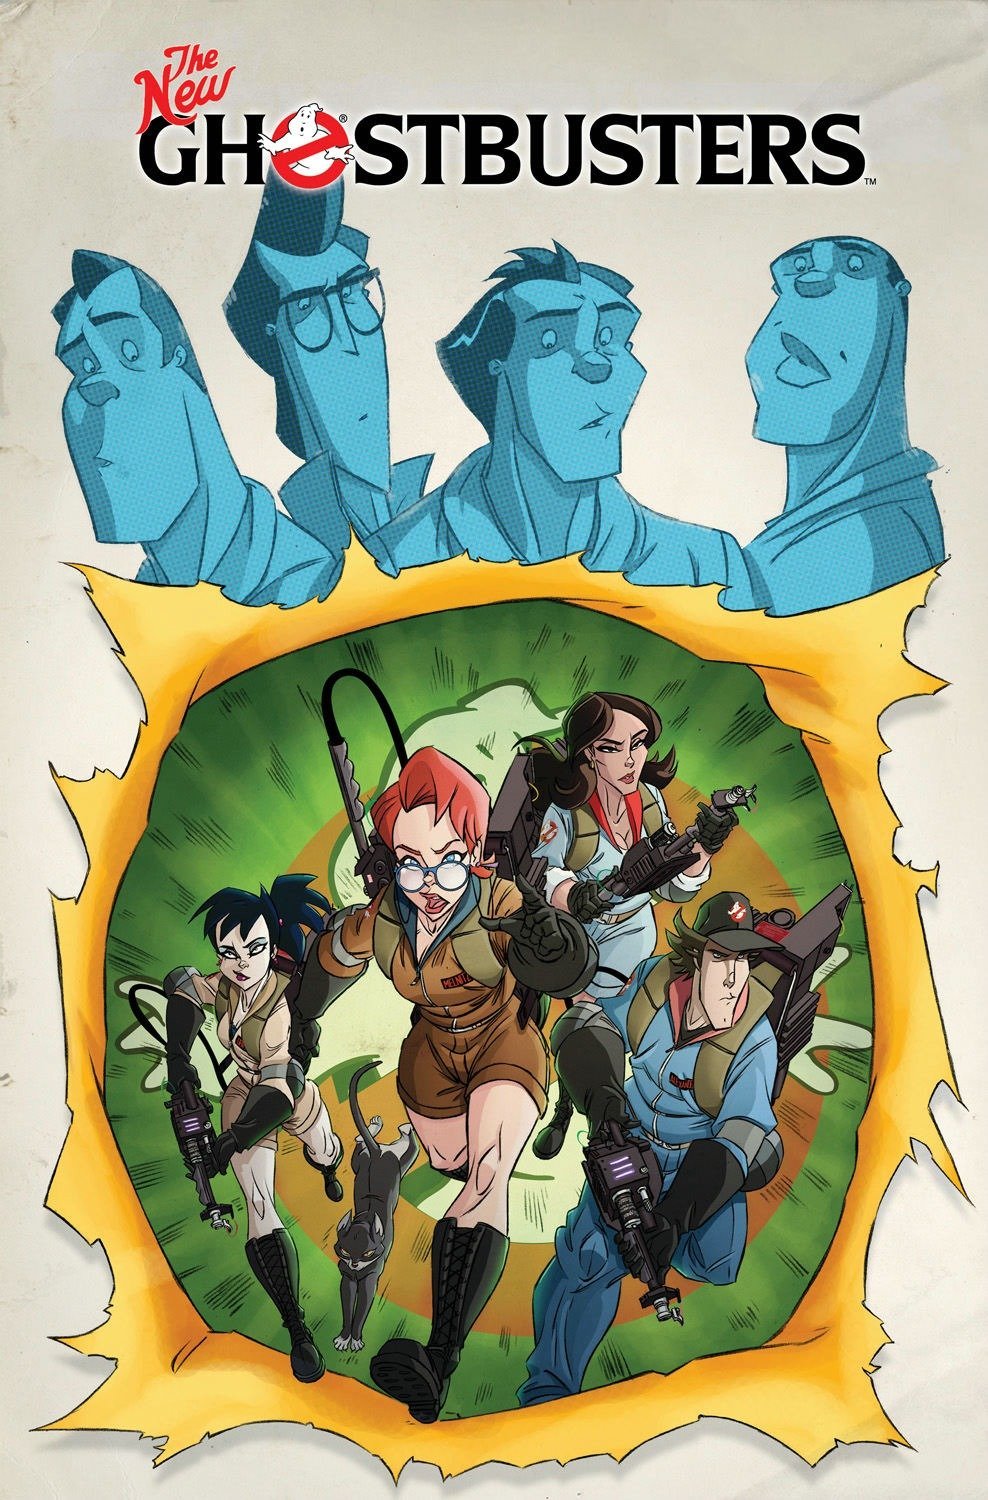 Ghostbusters Vol. 5 : The New Ghostbusters